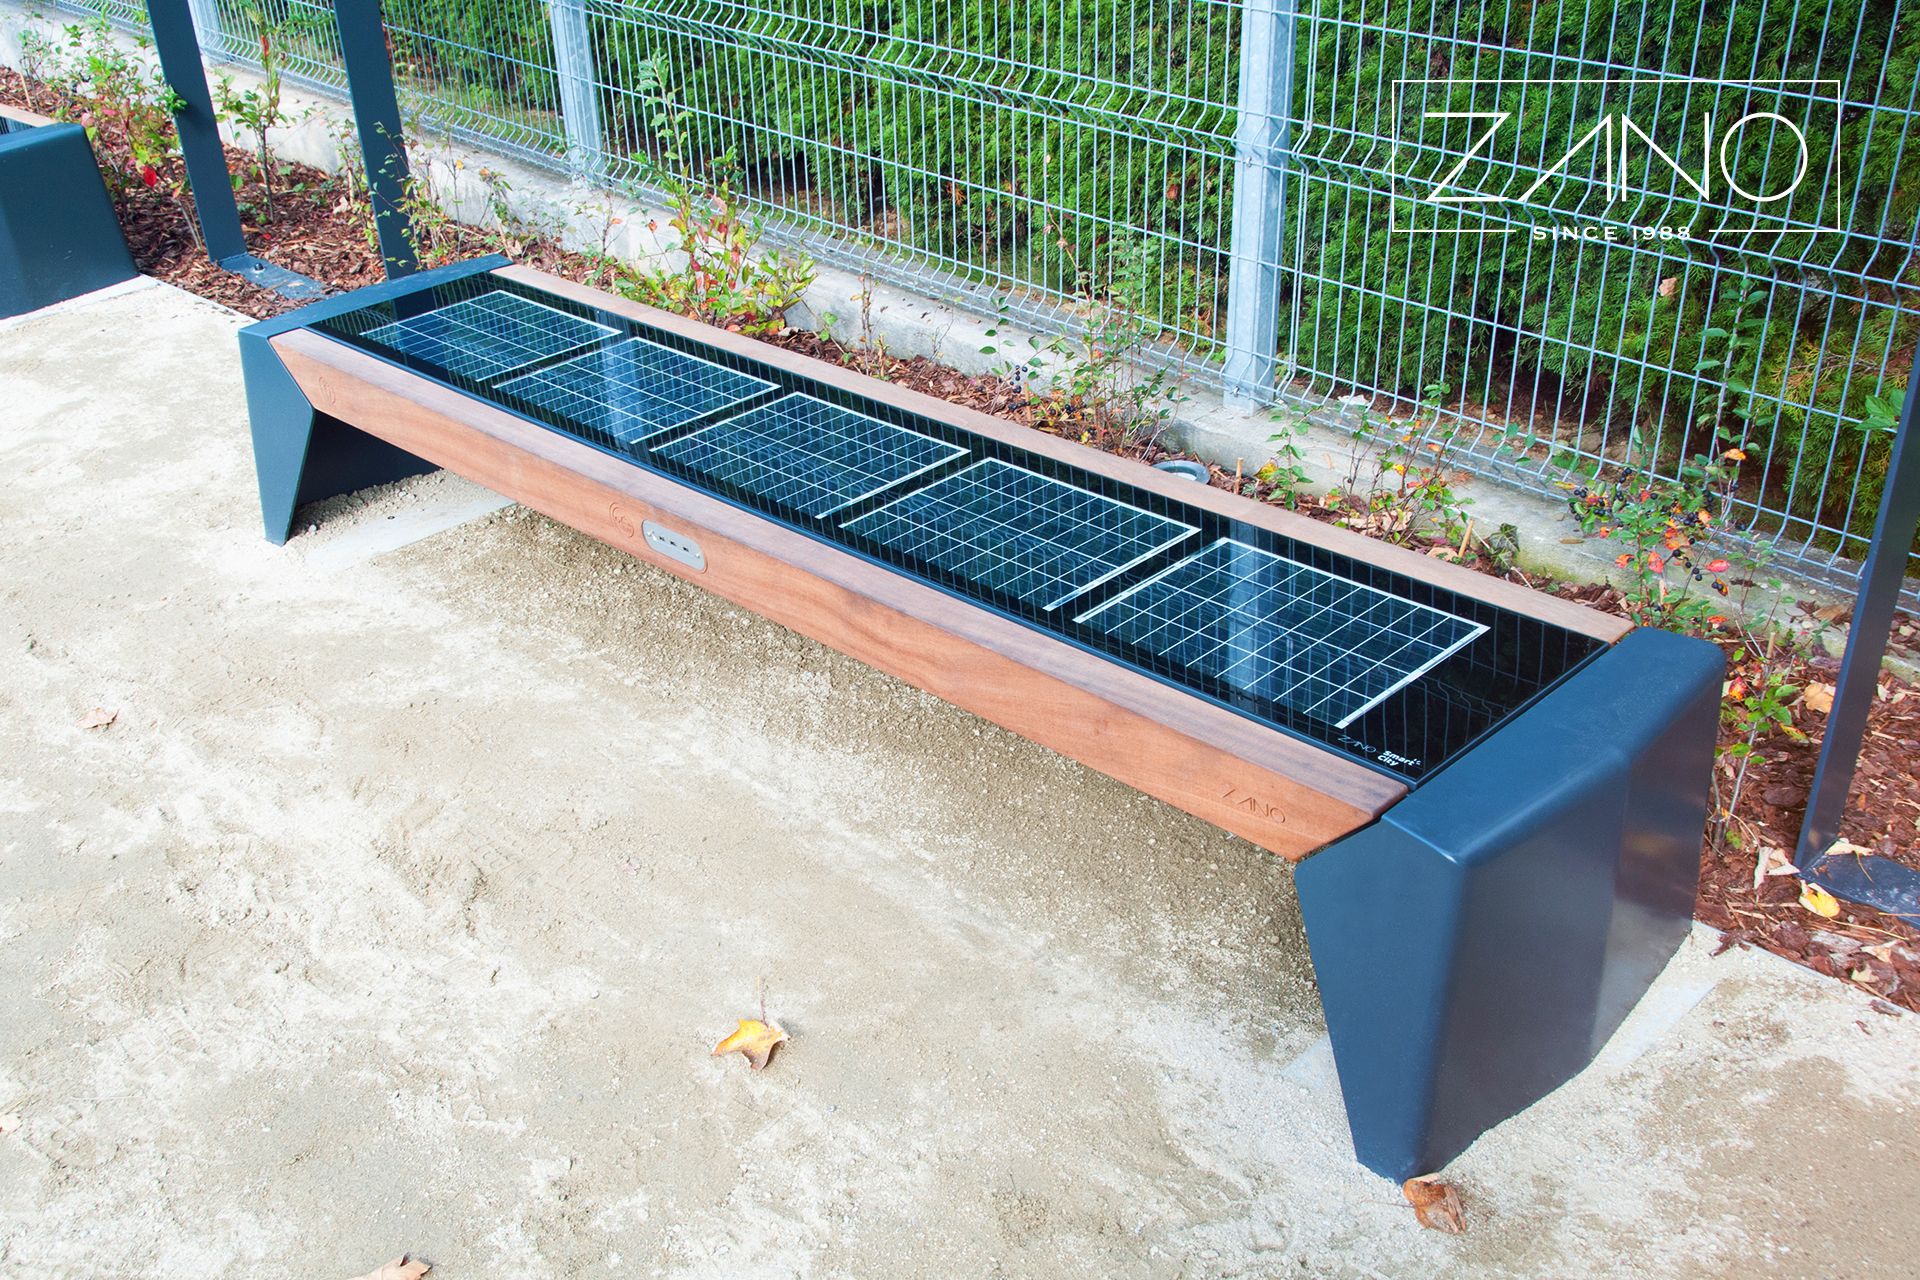 ZANO - manufacturer of smart city and solar benches